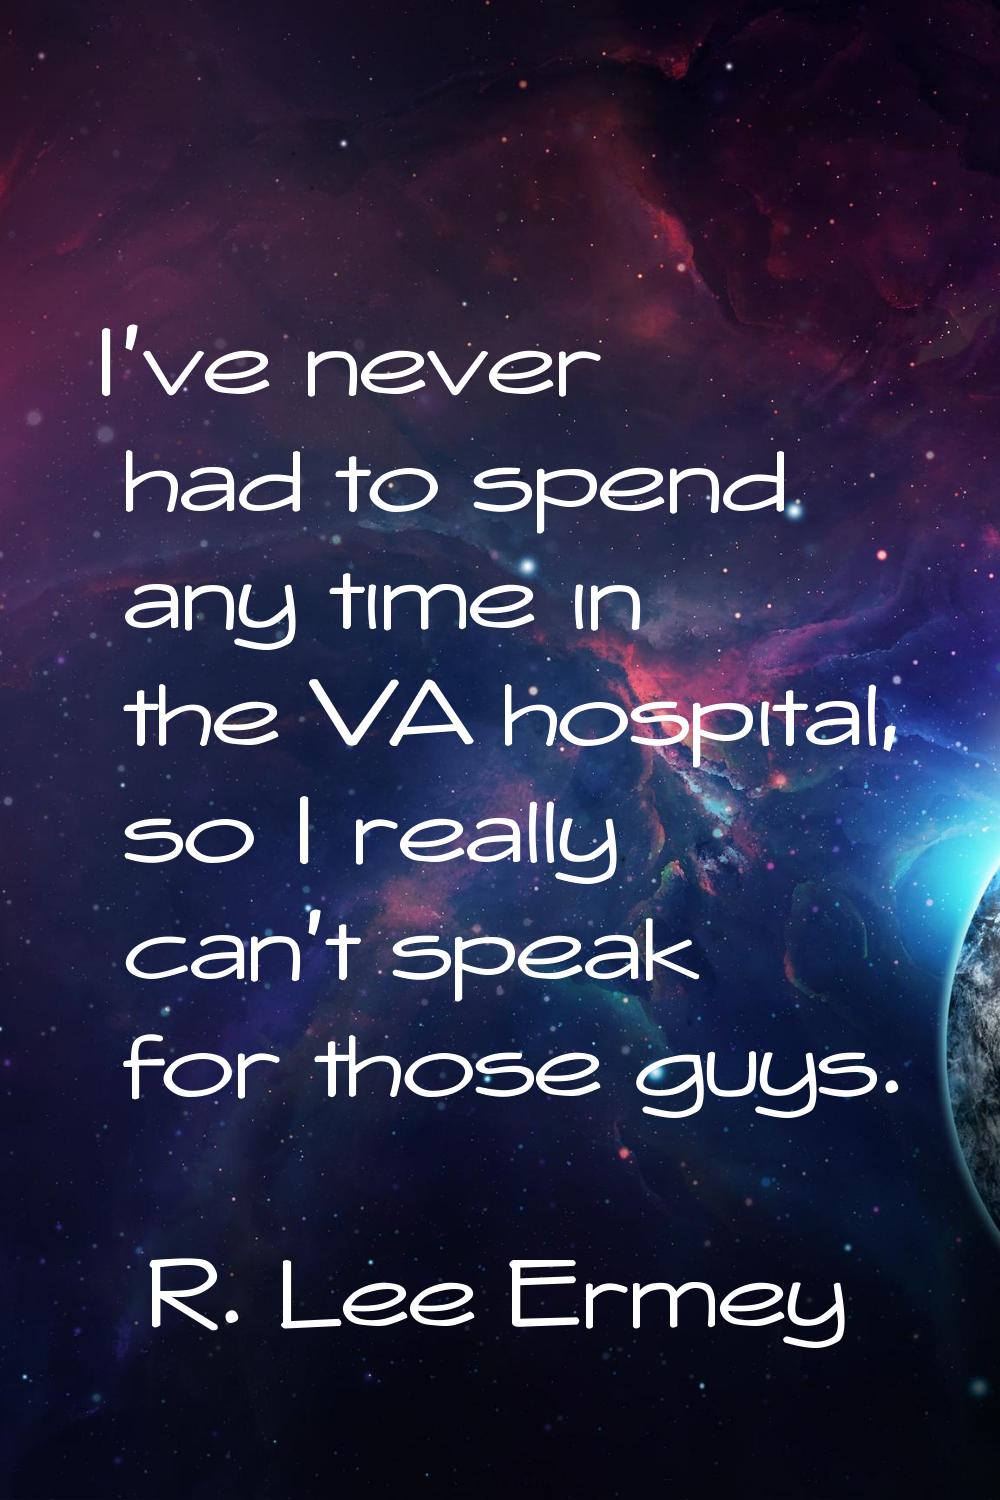 I've never had to spend any time in the VA hospital, so I really can't speak for those guys.